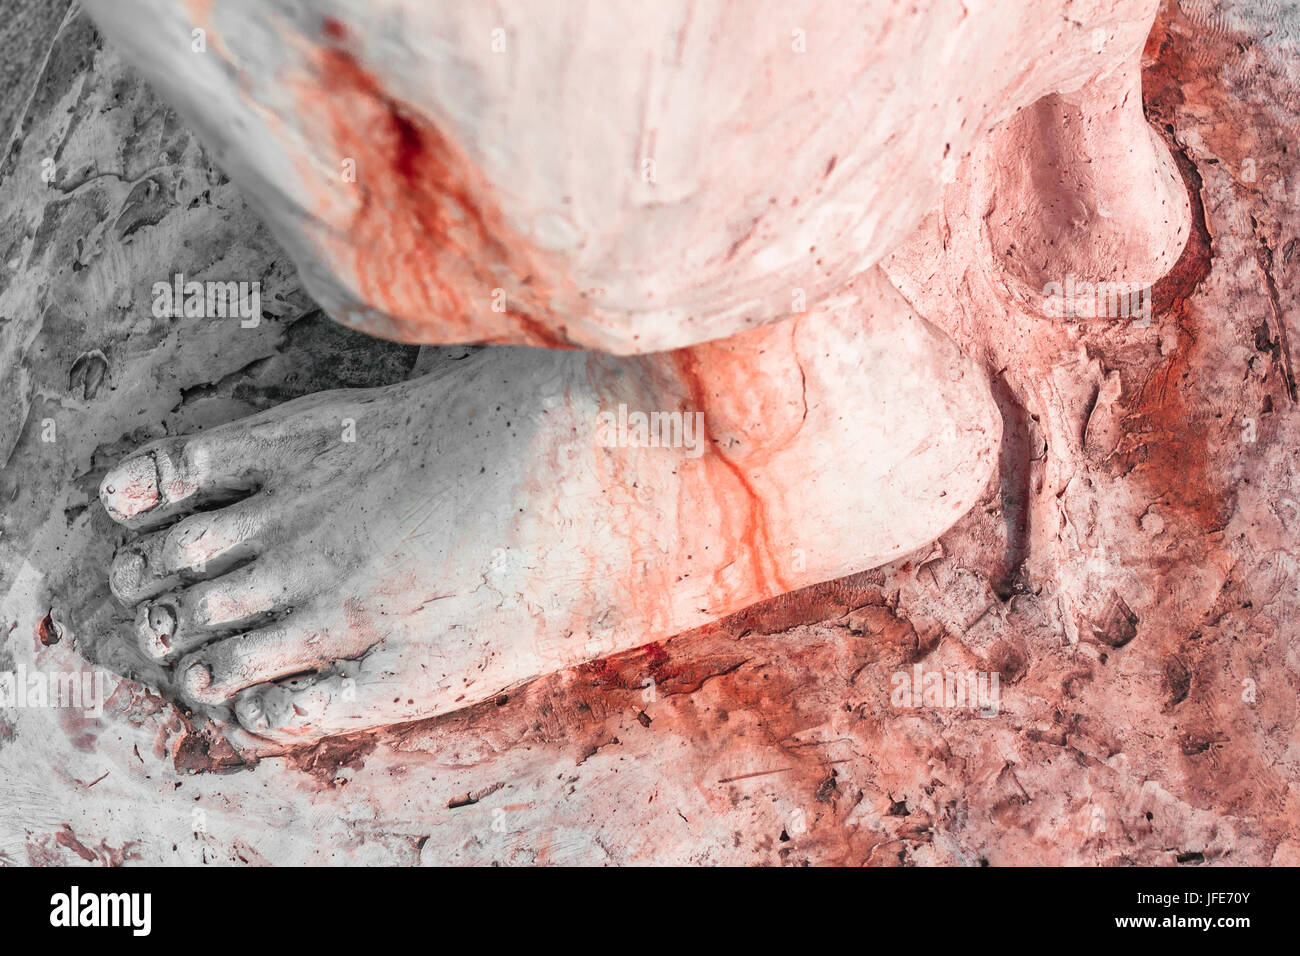 Foot of Christ bloodied Stock Photo